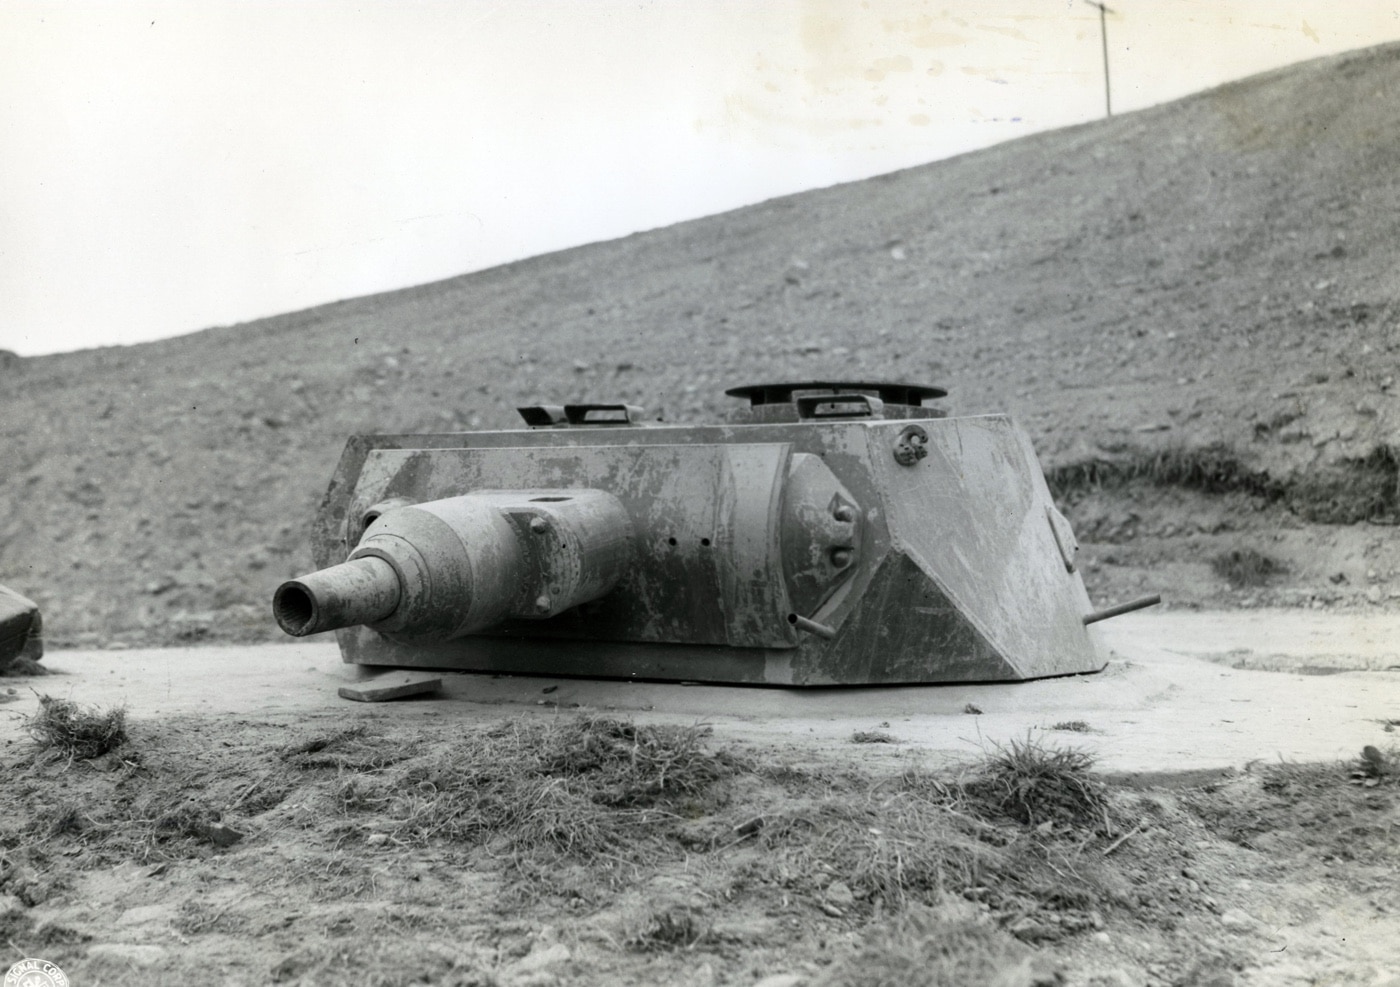 In this photo we see a German VK 30.01 (H) tank turret used as bunker on Omaha beach.